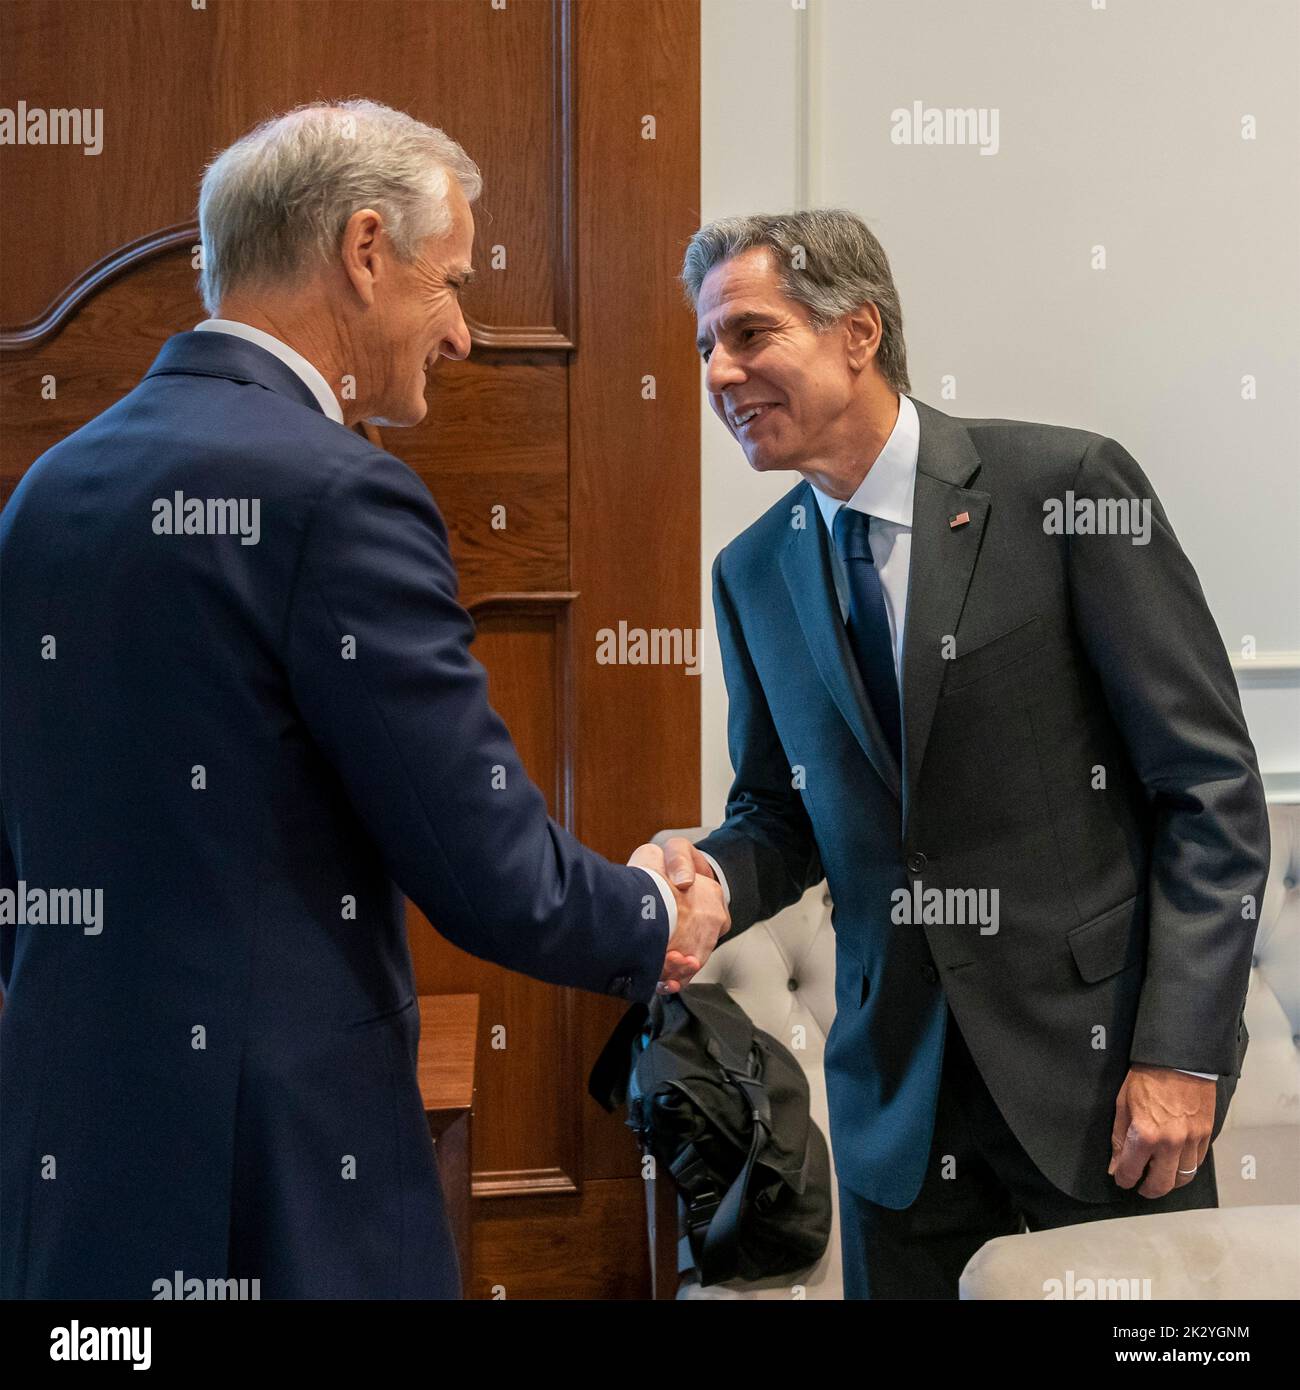 New York City, United States. 22nd Sep, 2022. U.S. Secretary of State Tony Blinken, right, welcomes Norwegian Prime Minister Jonas Gahr Støre, left, before the start of their bilateral meeting on the sidelines of the 77th Session of the U.N General Assembly, September 22, 2022, in New York City. Credit: Ron Przysucha/State Department Photo/Alamy Live News Stock Photo